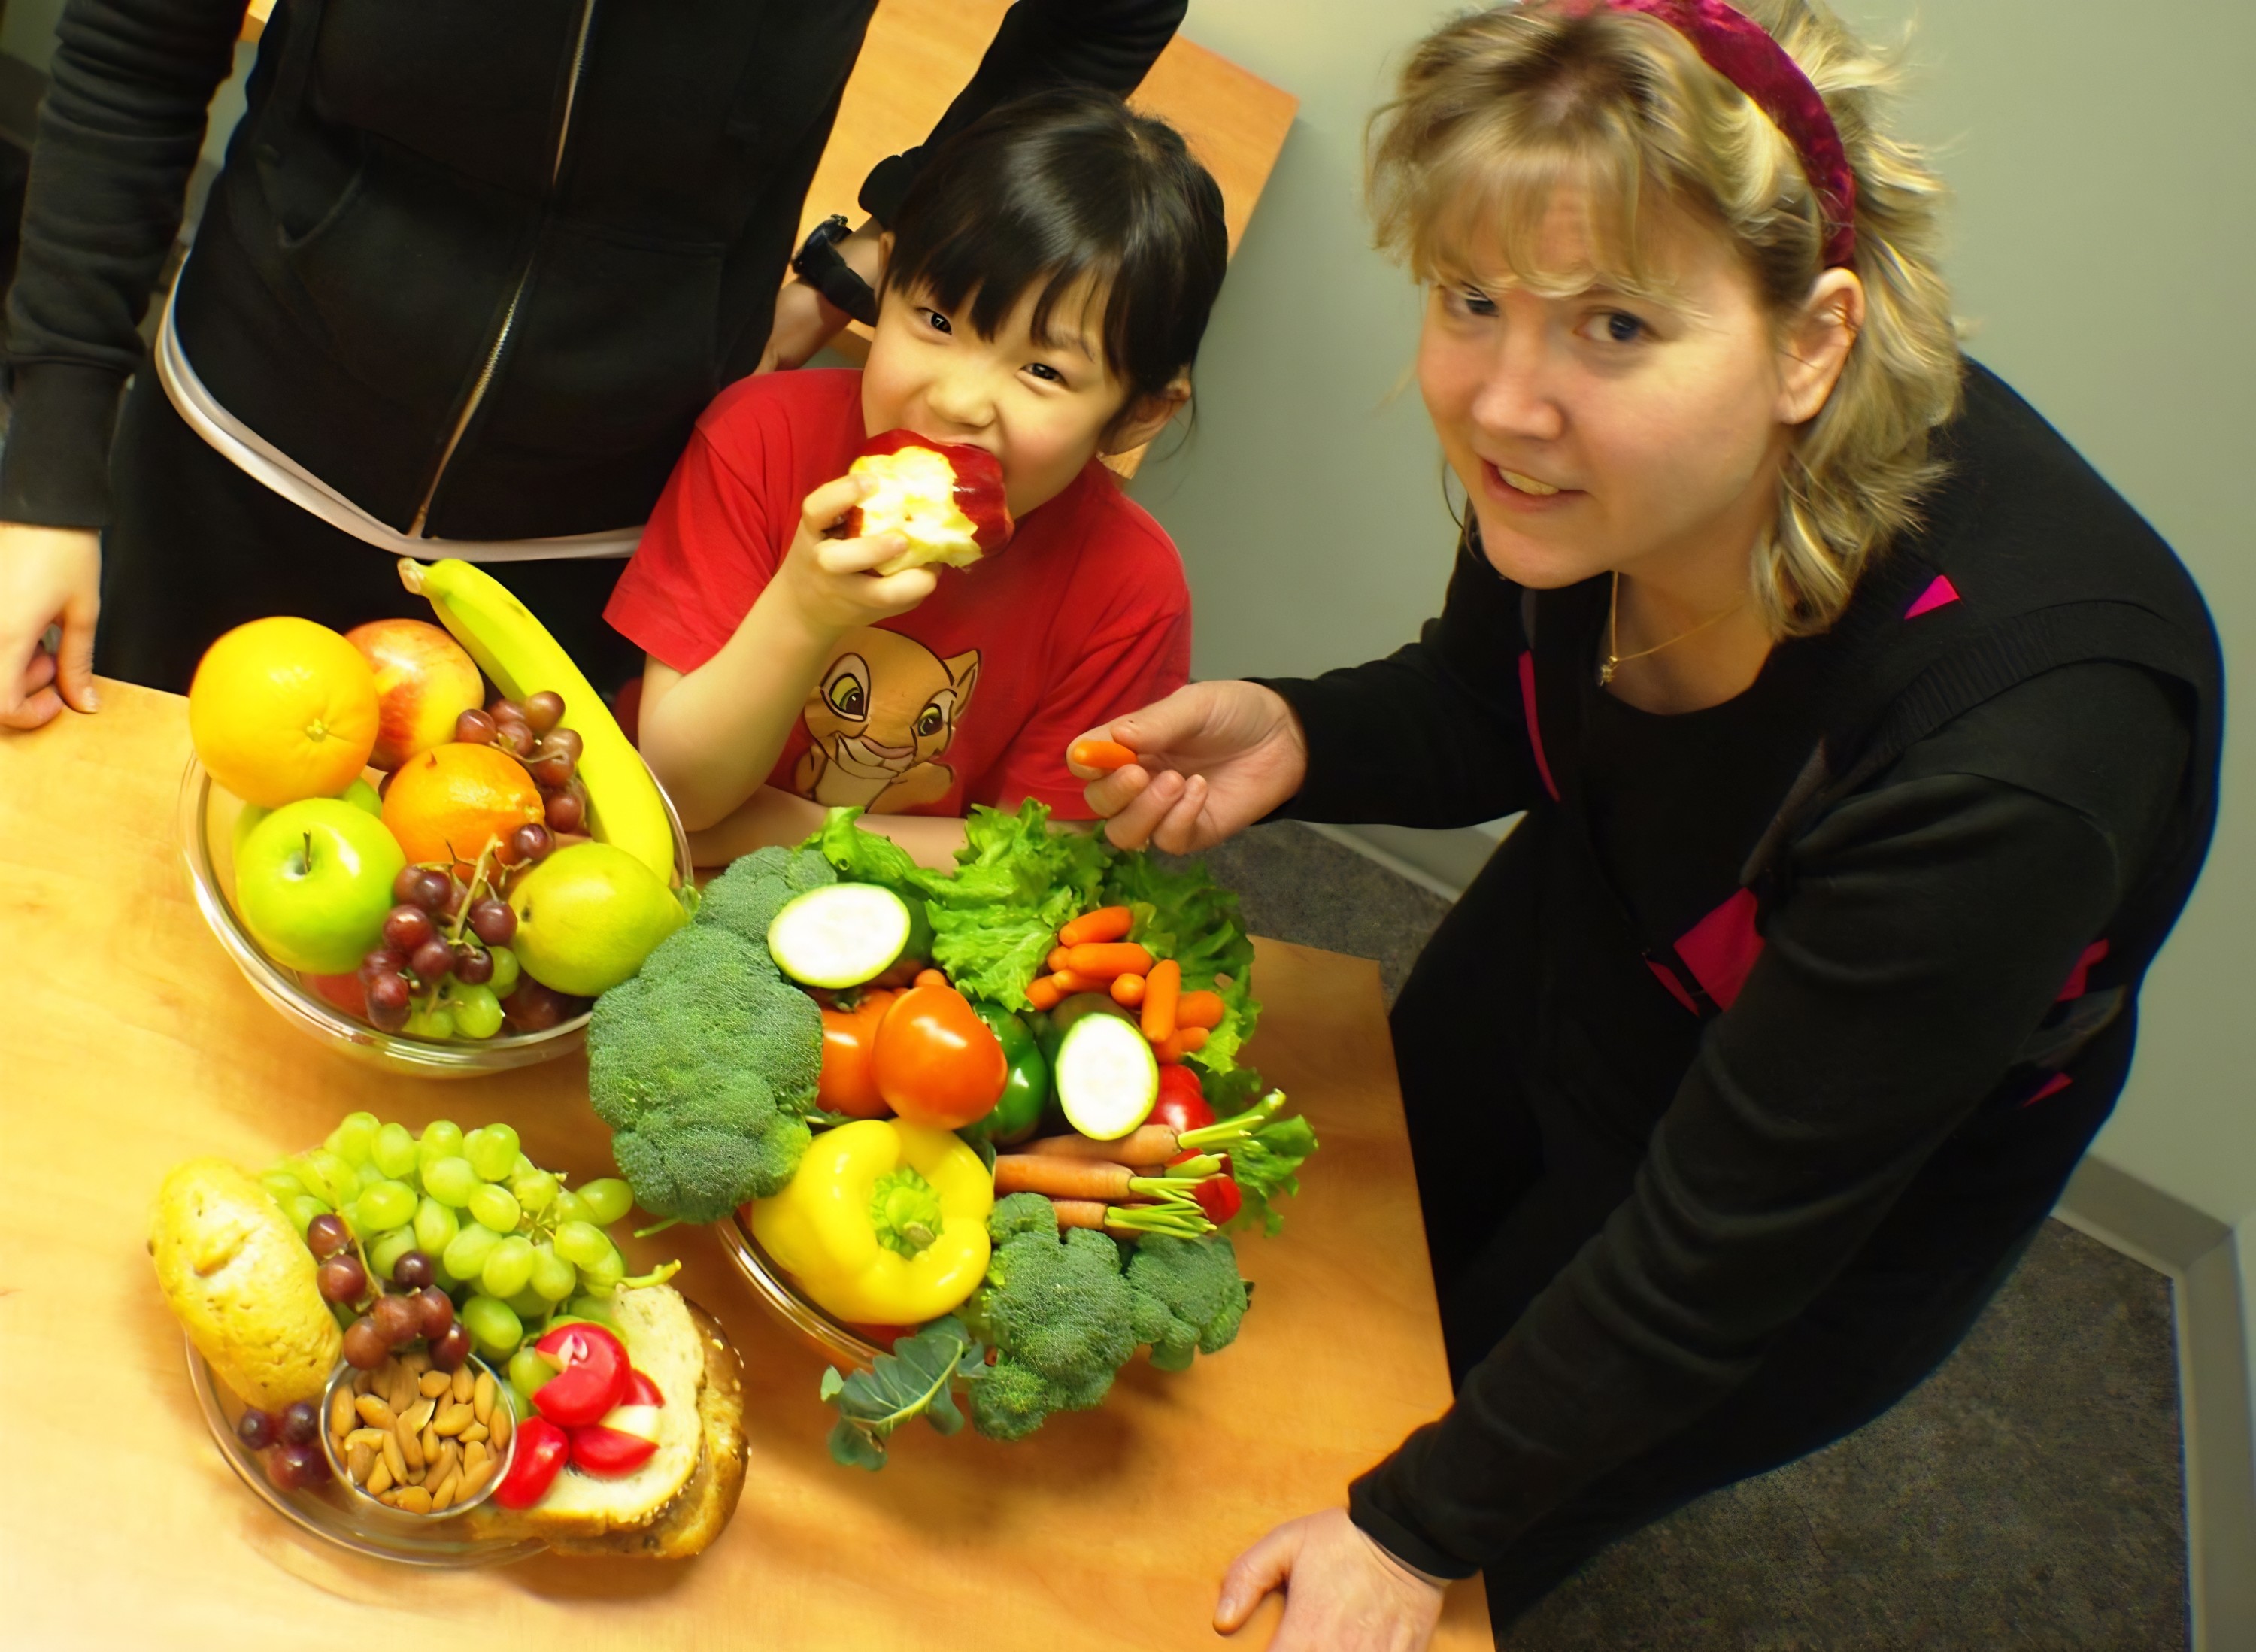 Nutrition researcher Diana Mager is pictured with her child at a table full of healthy foods like fruit and vegetables.